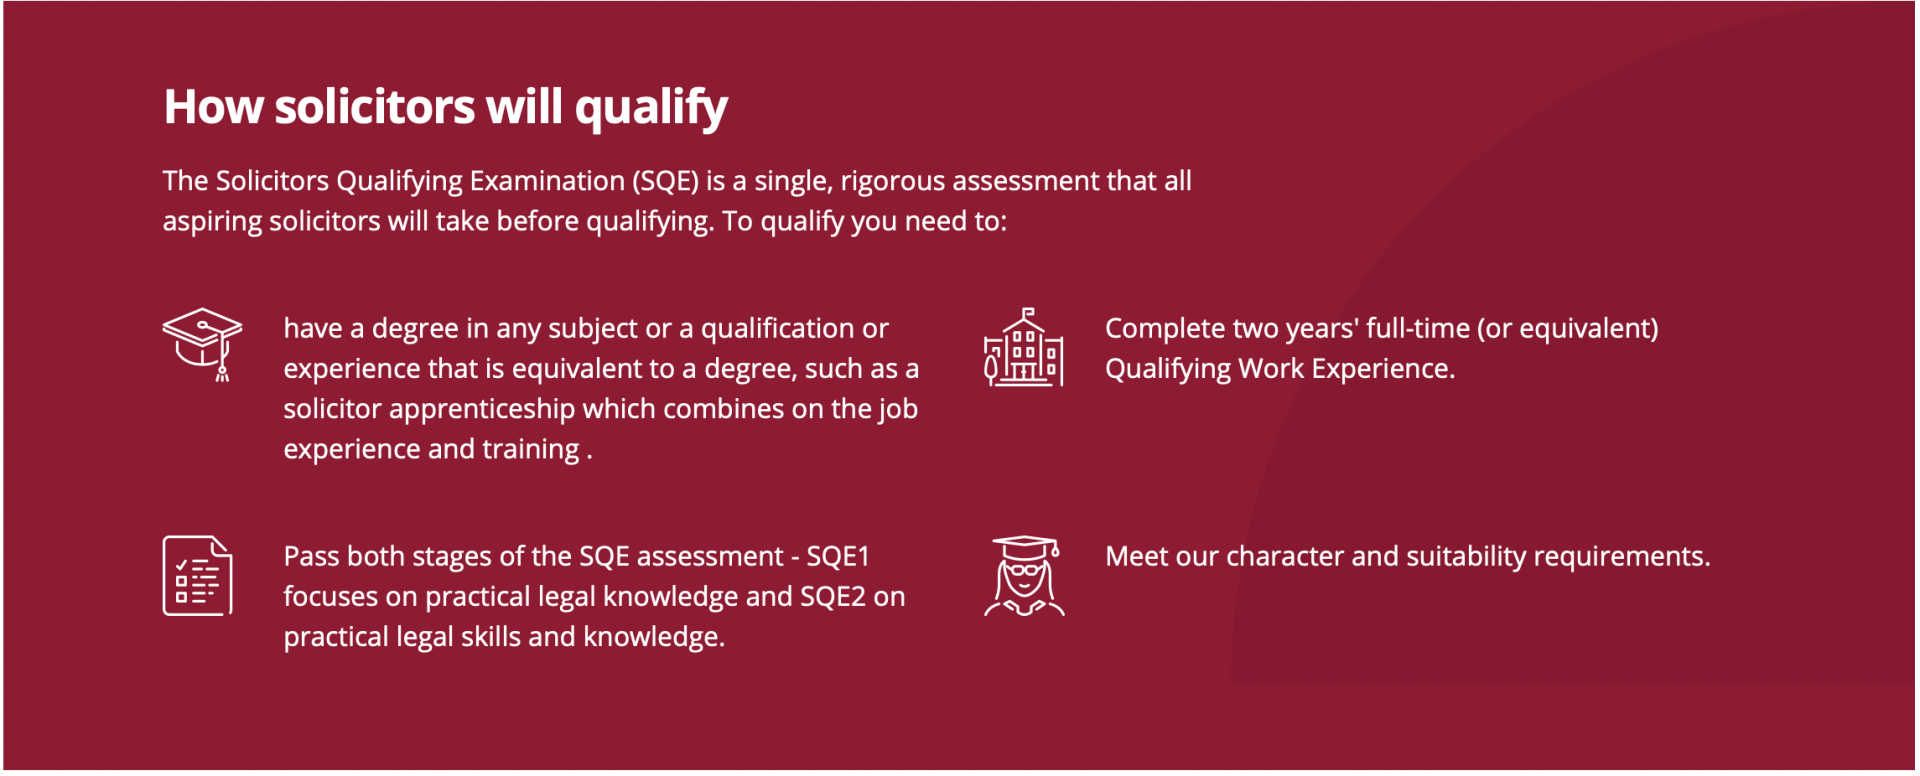 SRA's four tests for qualifying under SQE